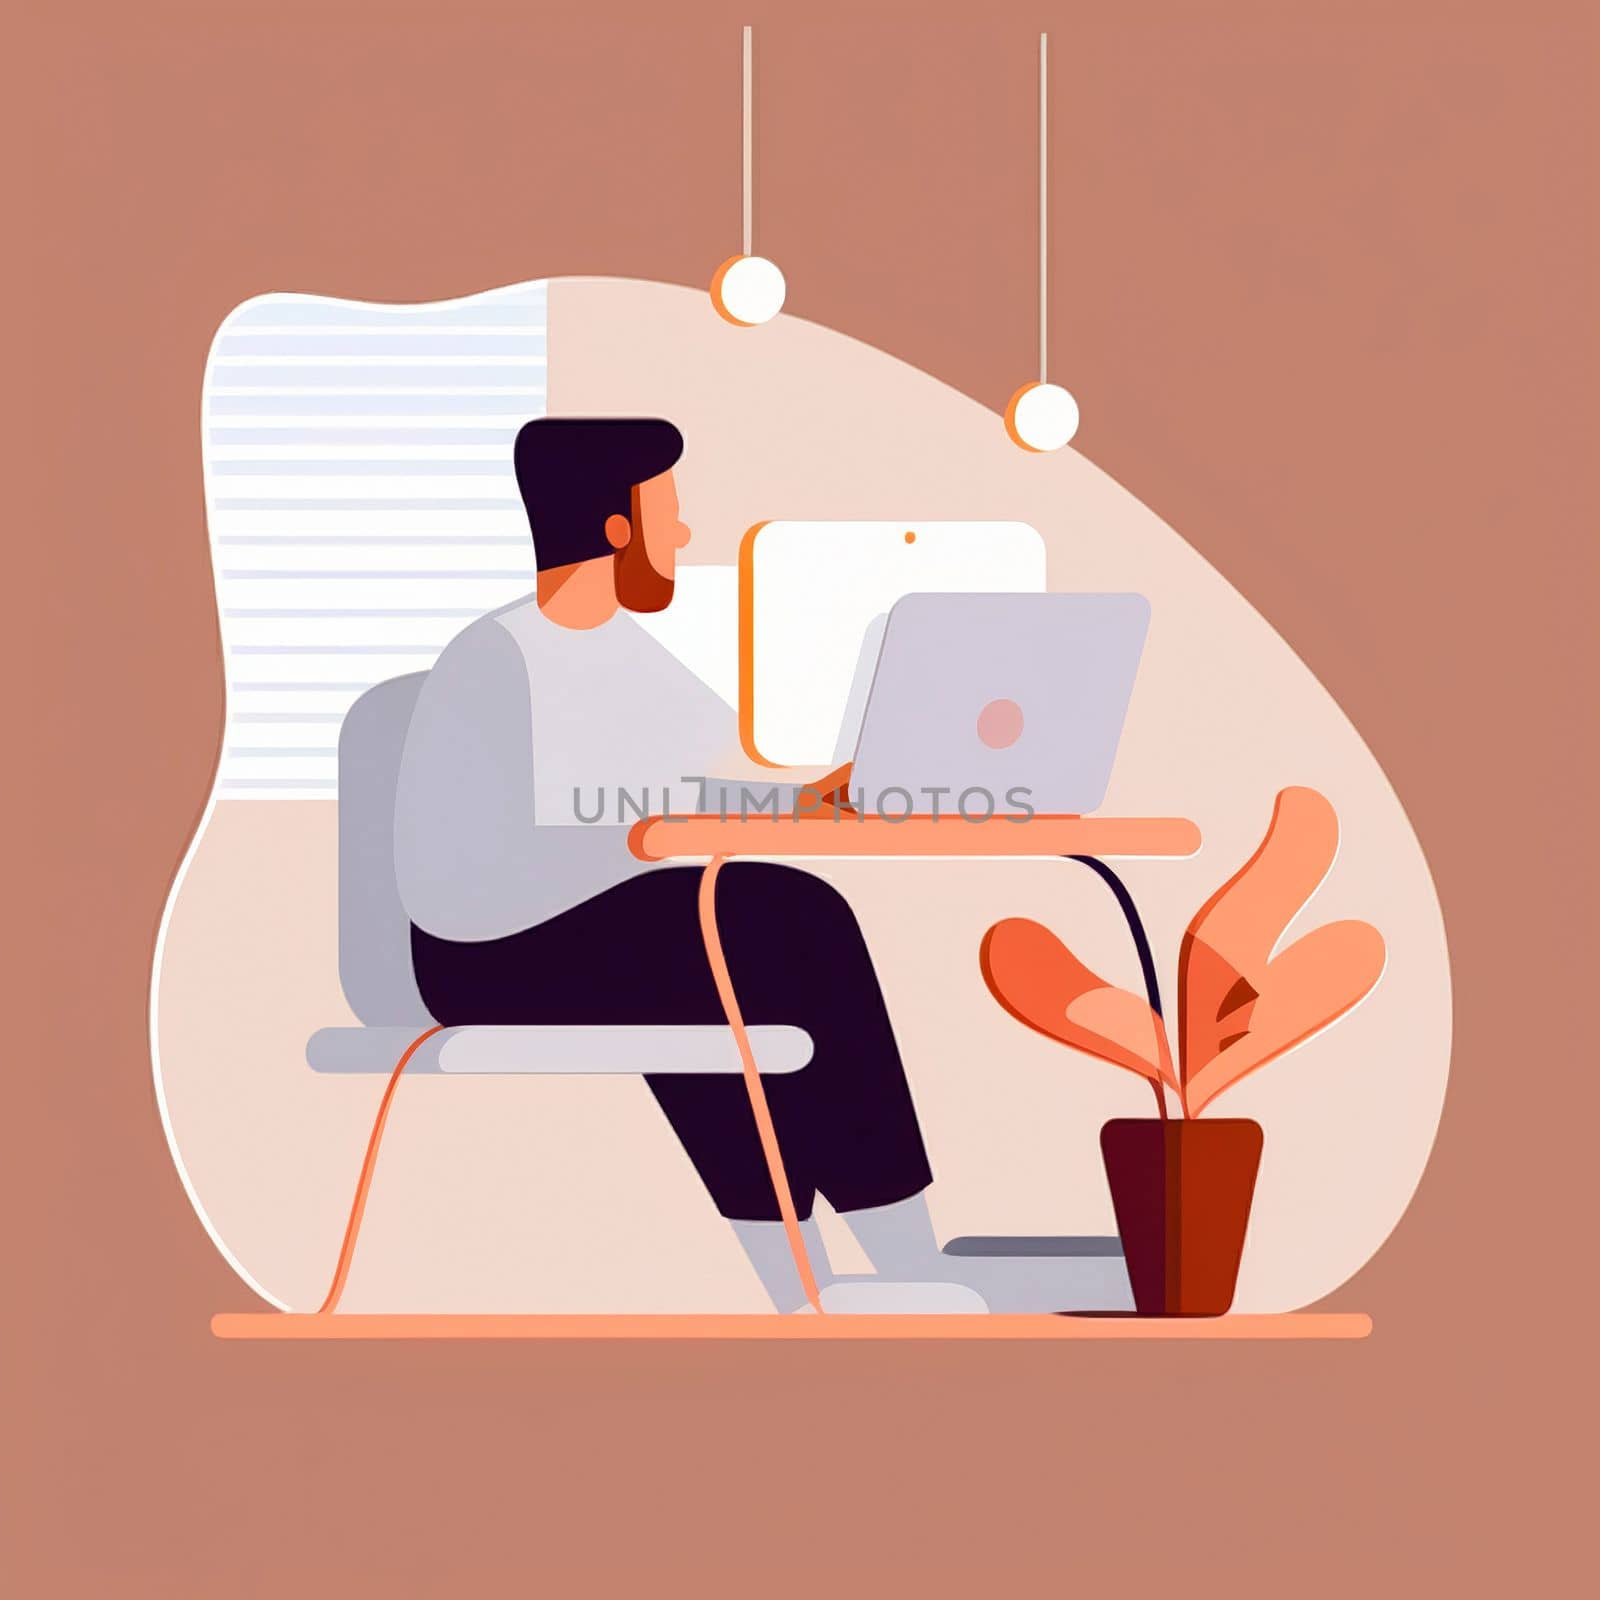 A simple illustration of a developer sitting at a laptop. High quality illustration